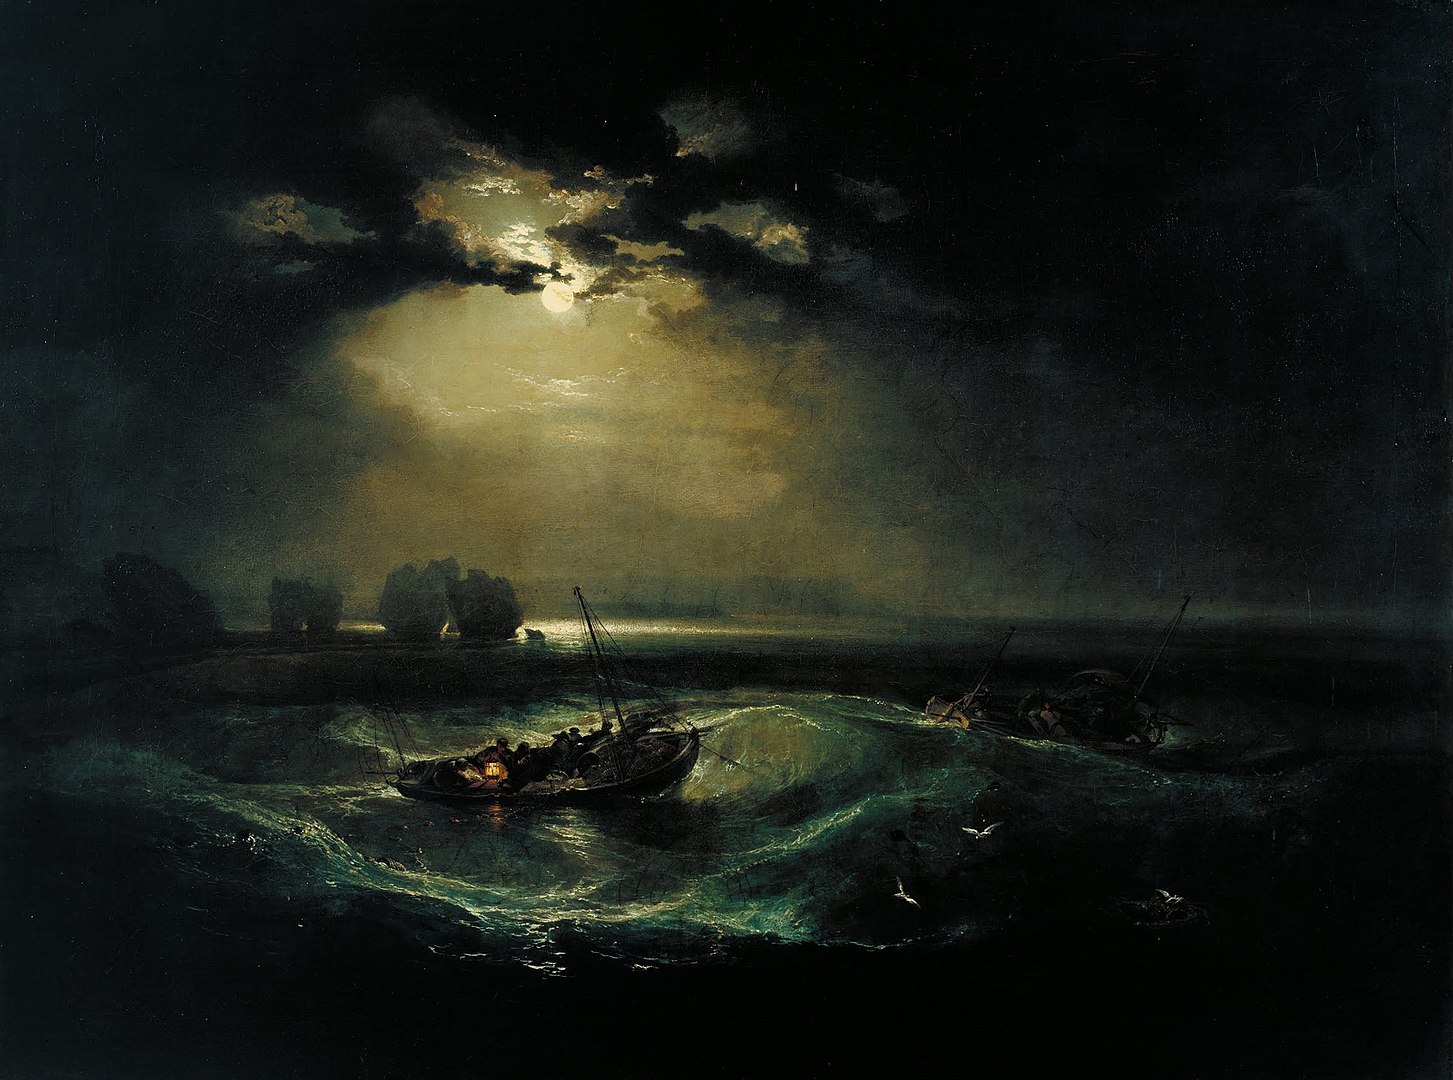 J. M. W. Turner, Fishermen at the Sea, exhibited 1796, Tate Museum, London, UK. nocturnal paintings